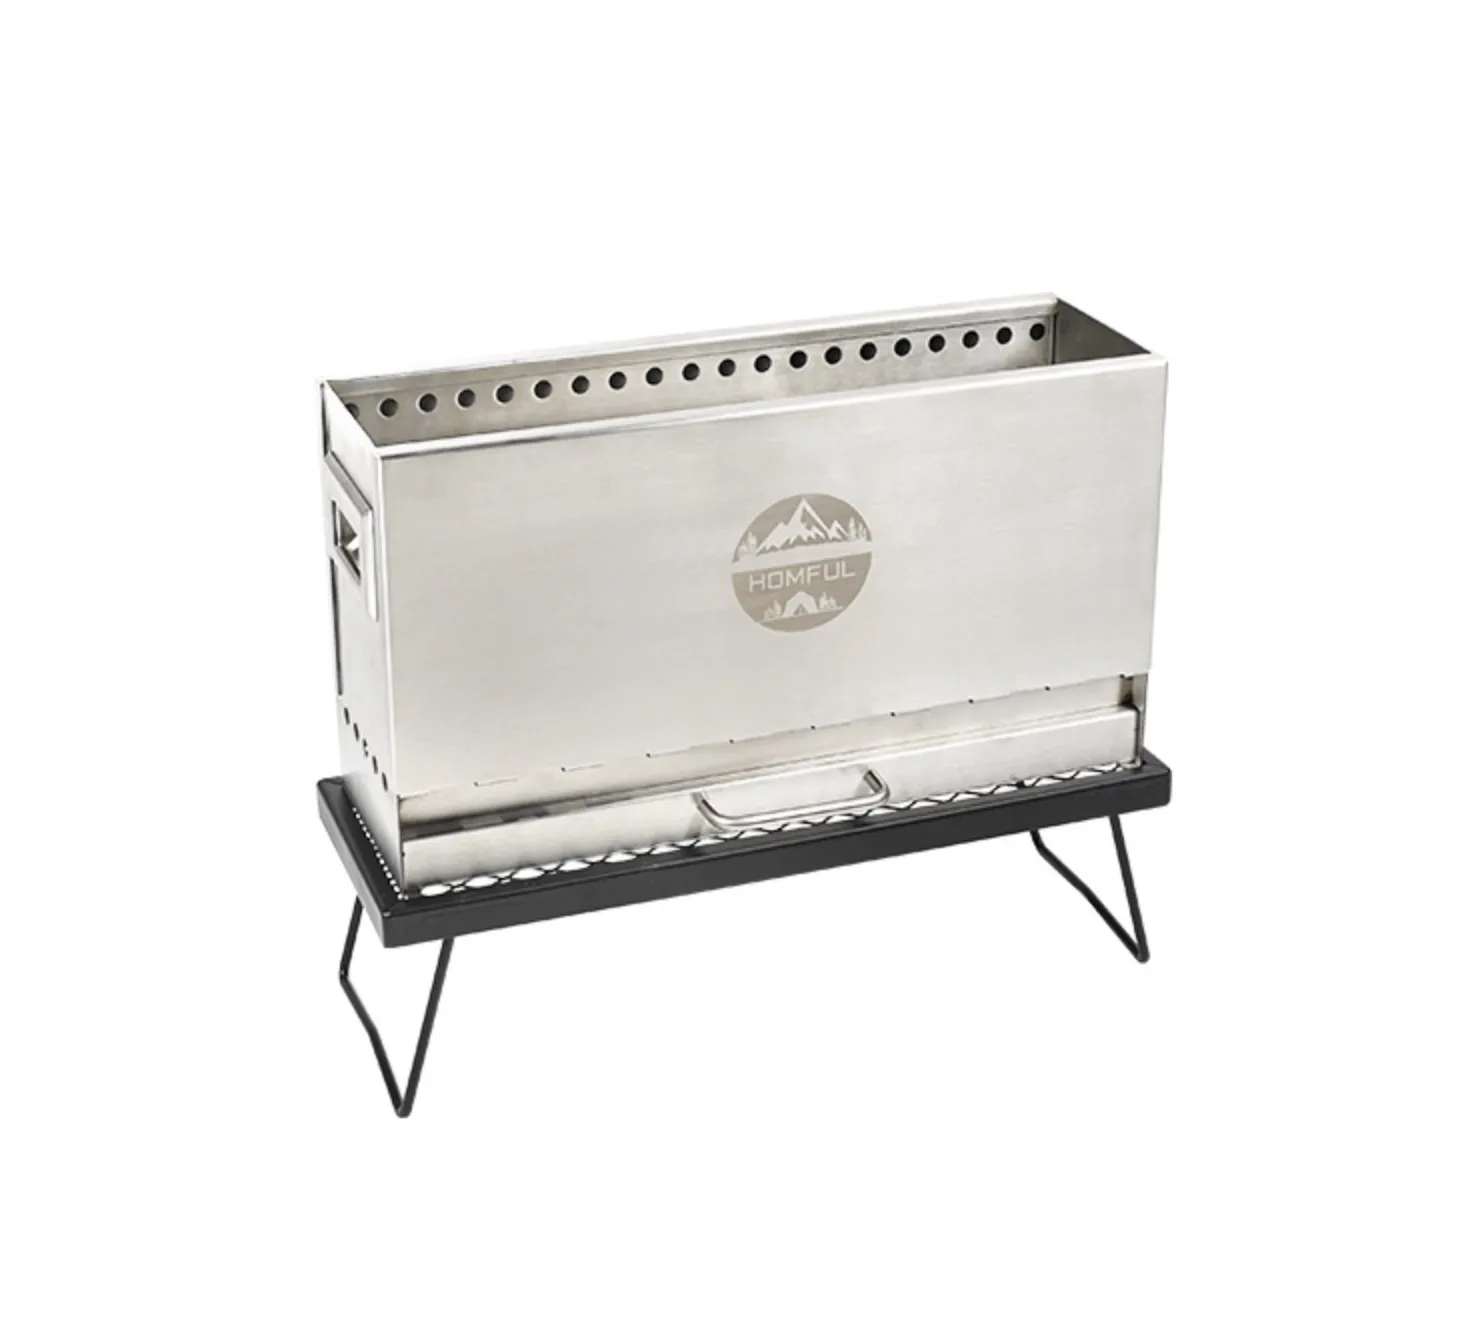 Country camping stainless steel portable BBQ grill Outdoor wind proof portable Charcoal stove